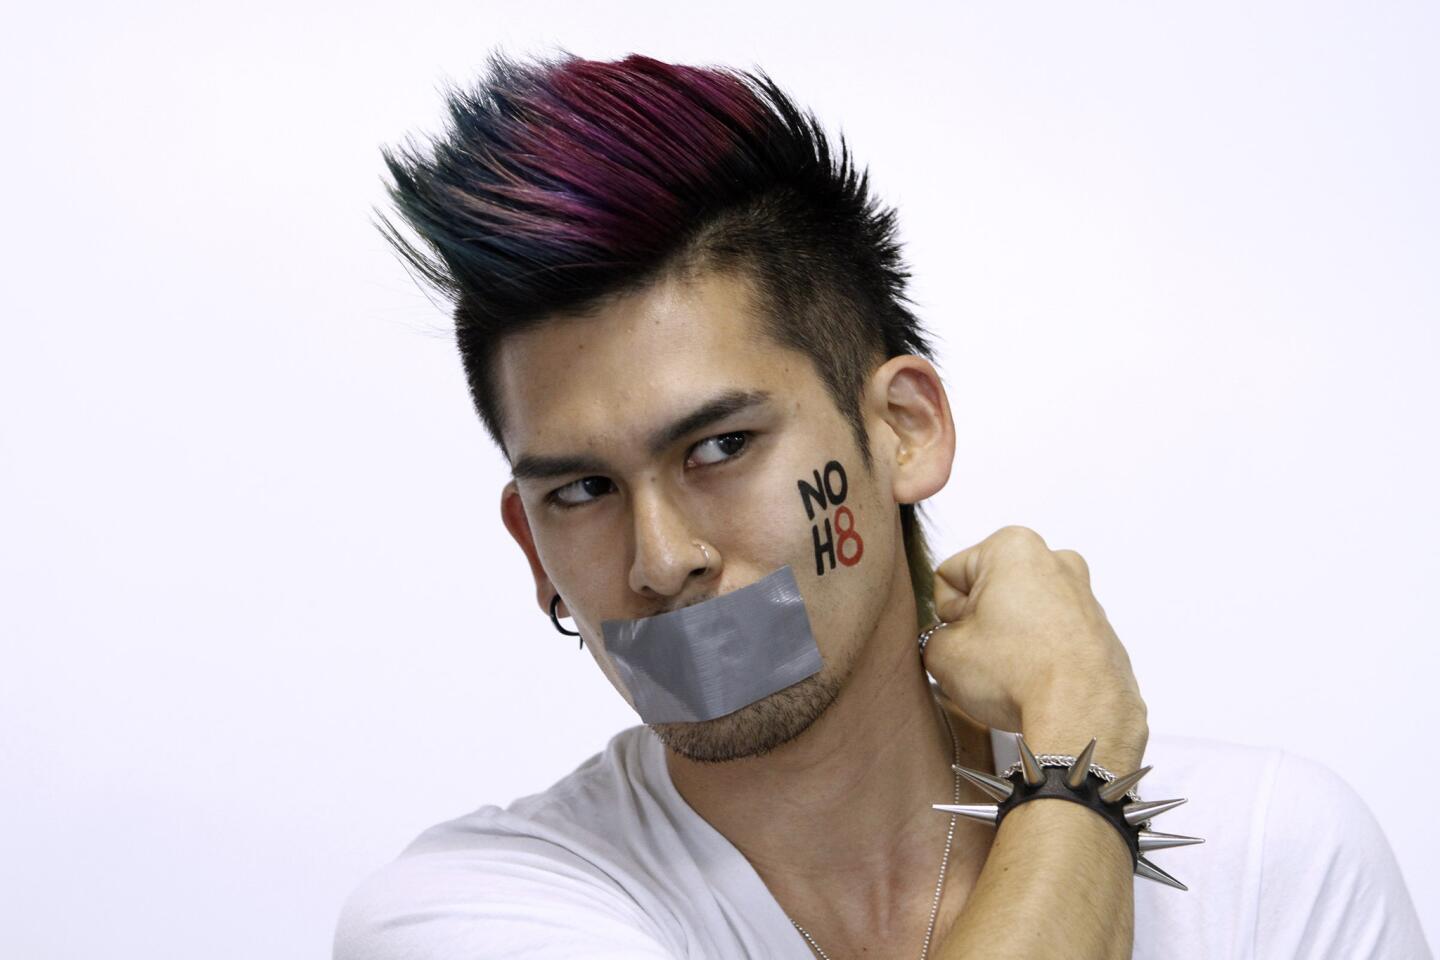 Photo Gallery: Public photo session at NOH8 headquarters in Burbank